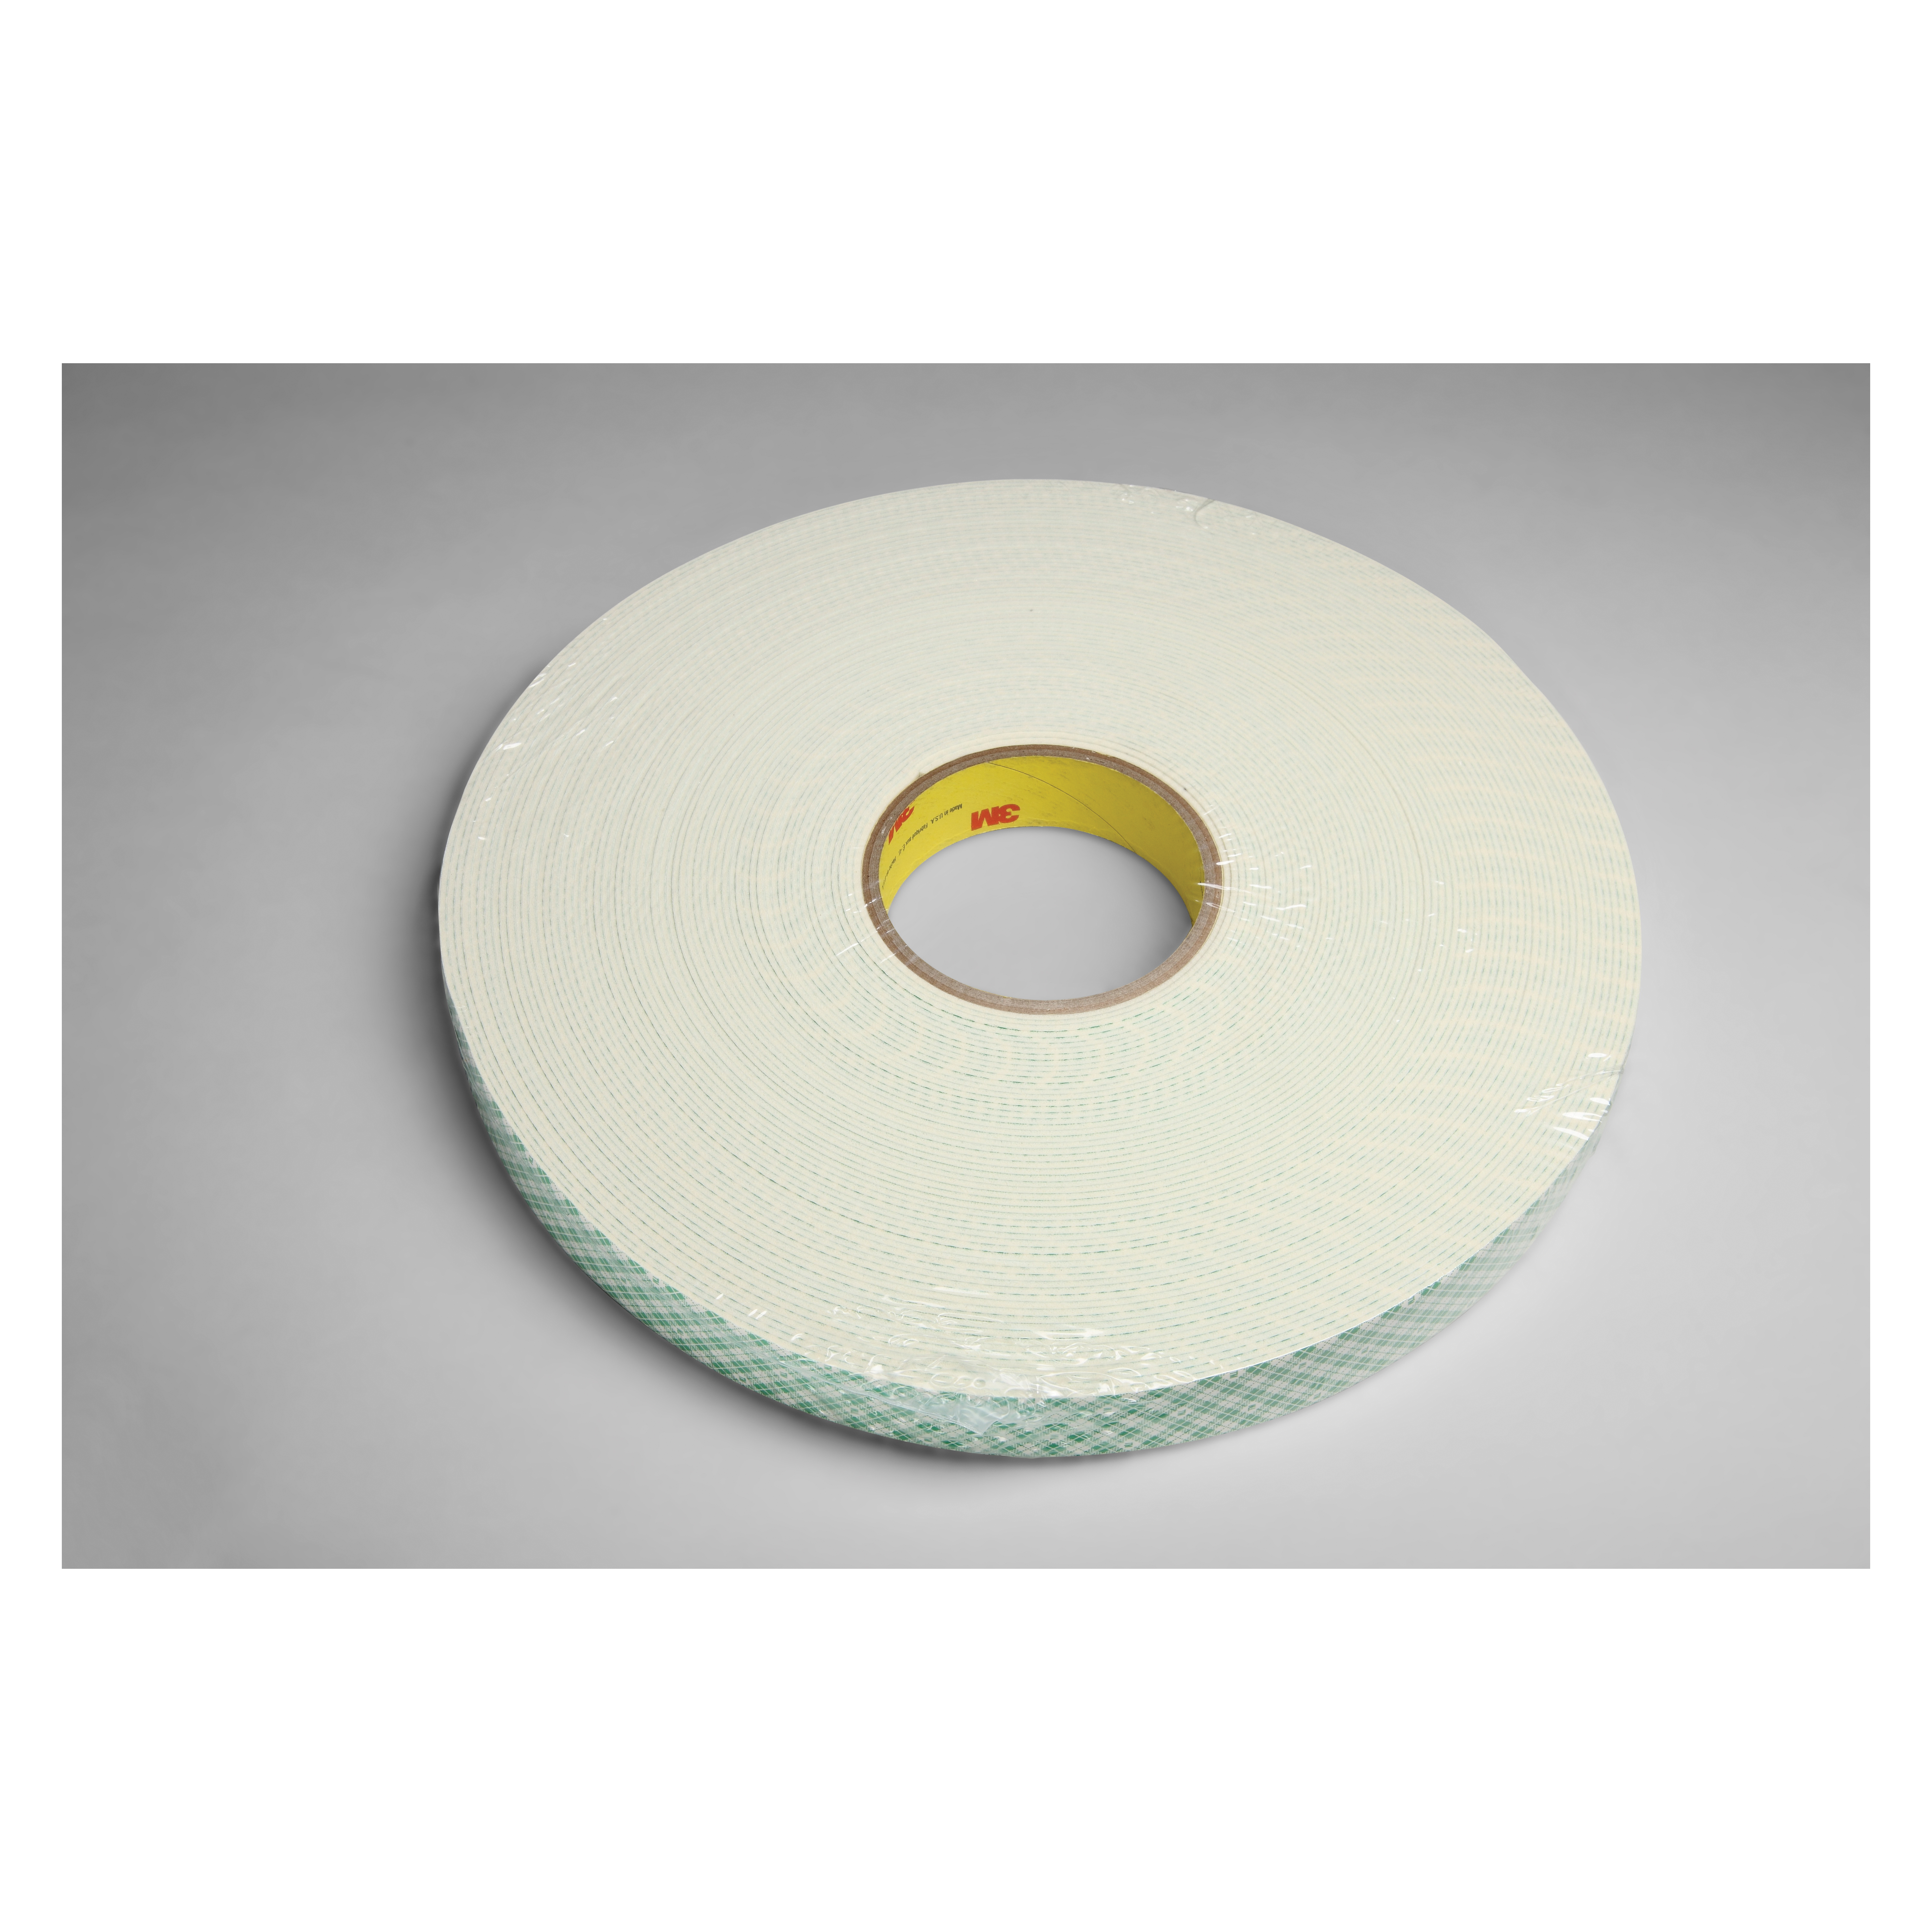 3M™ 021200-03398 Single Coated Foam Tape, 36 yd L x 1/4 in W, 62 mil THK, Acrylic Adhesive, Urethane Foam Backing, Natural